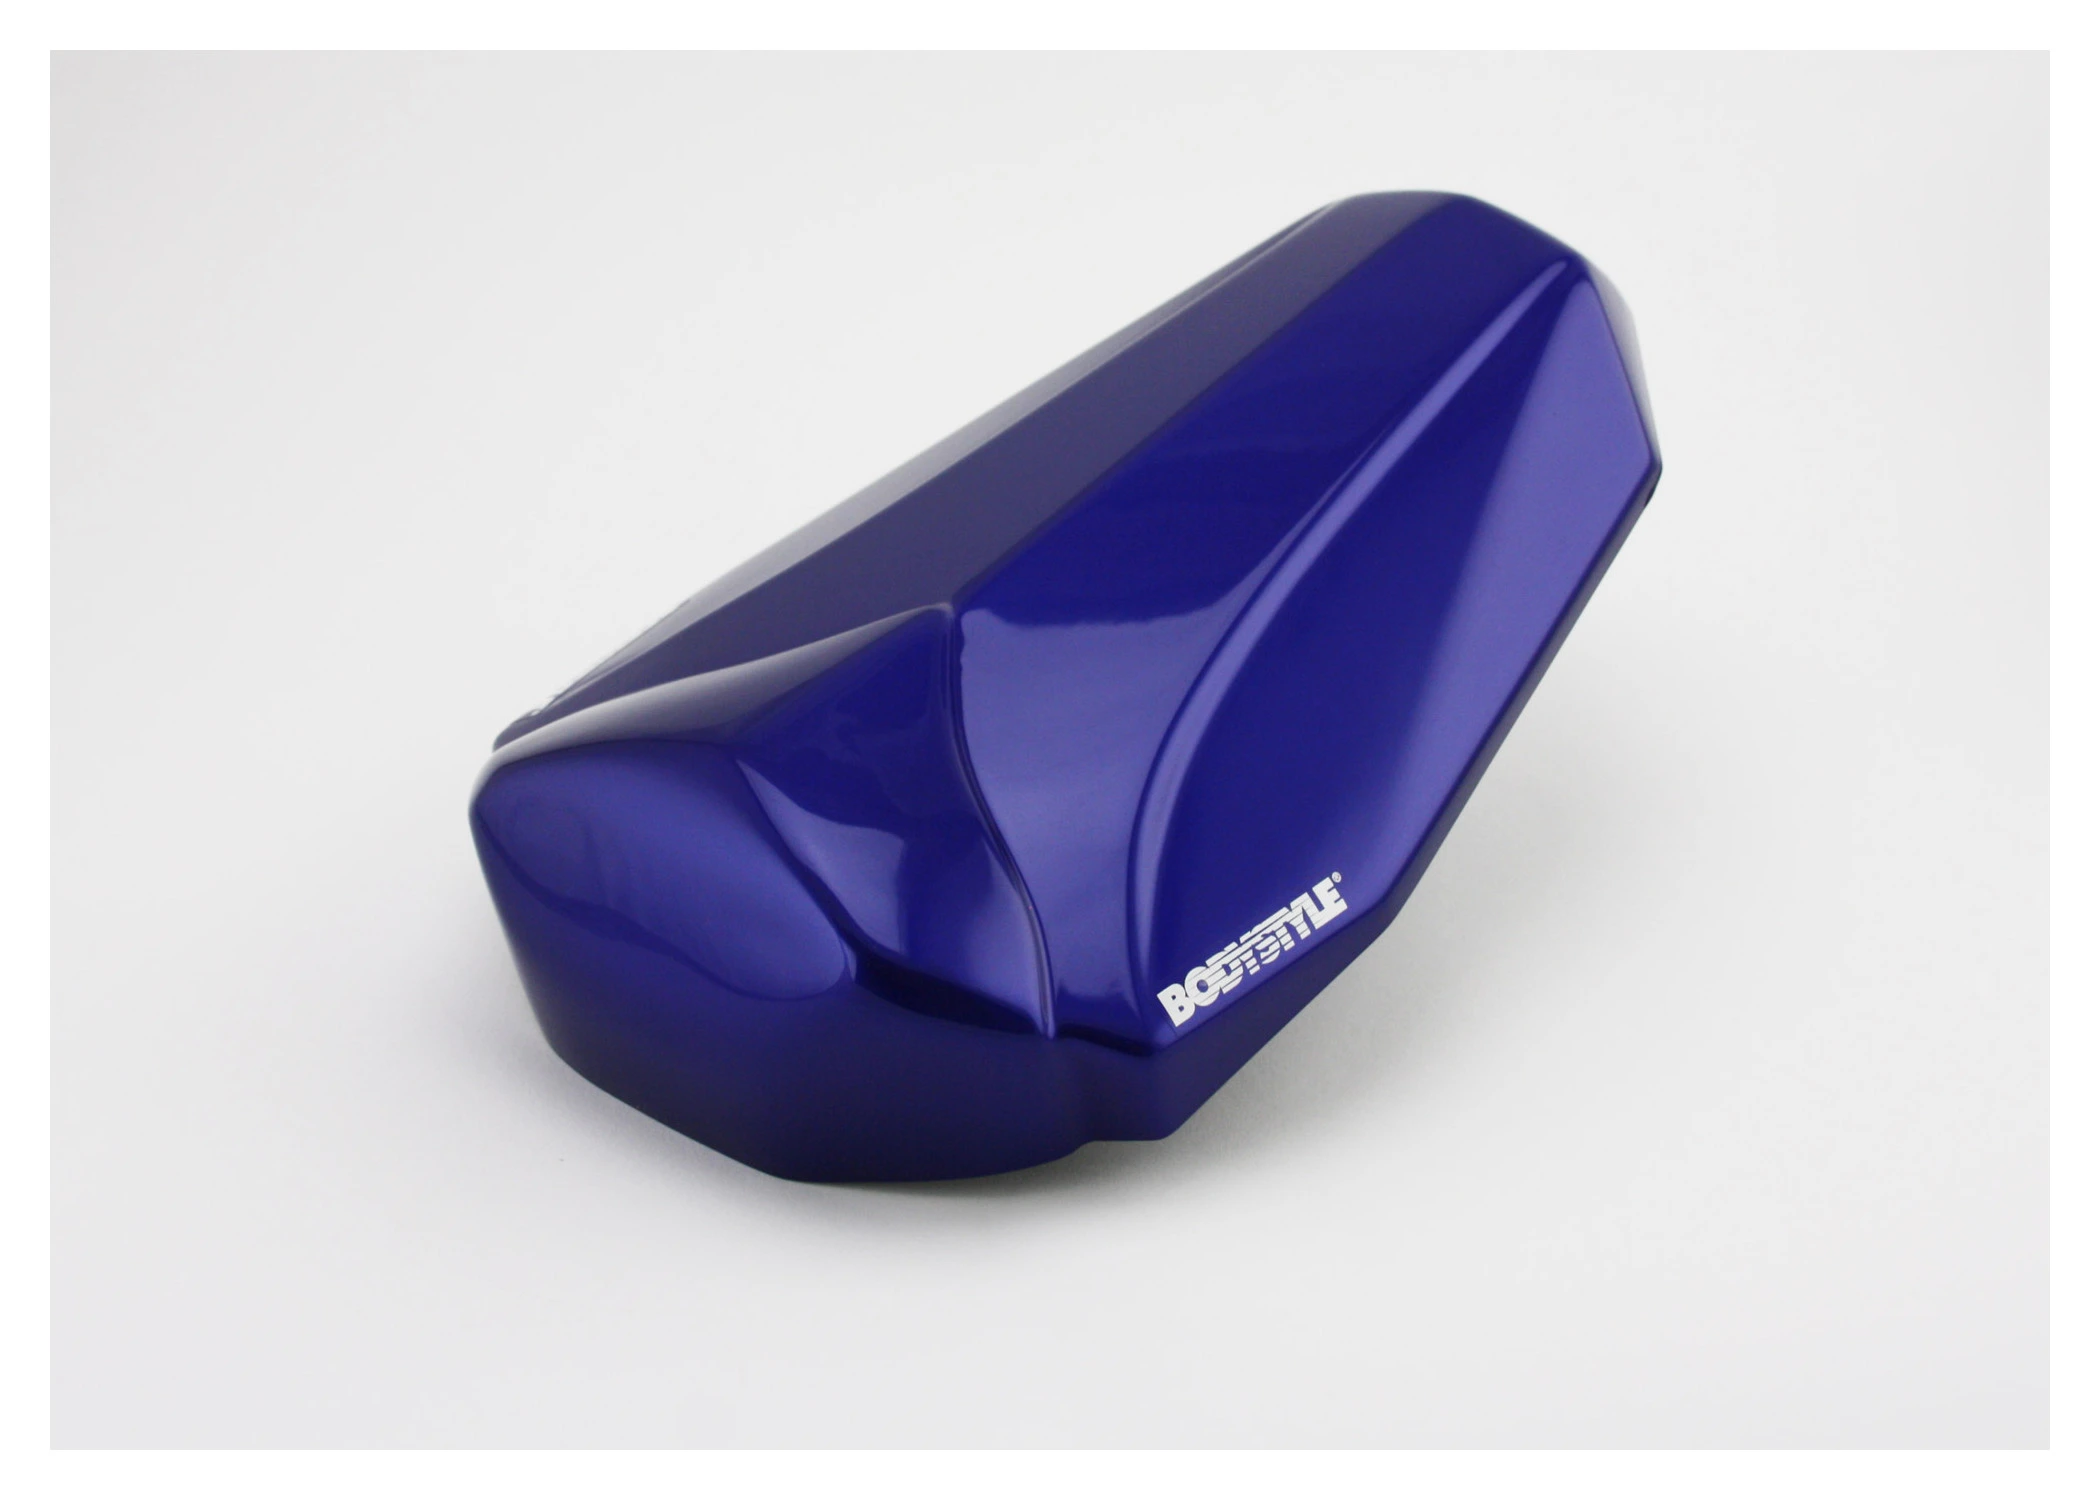 BODYSTYLE SEATCOVER